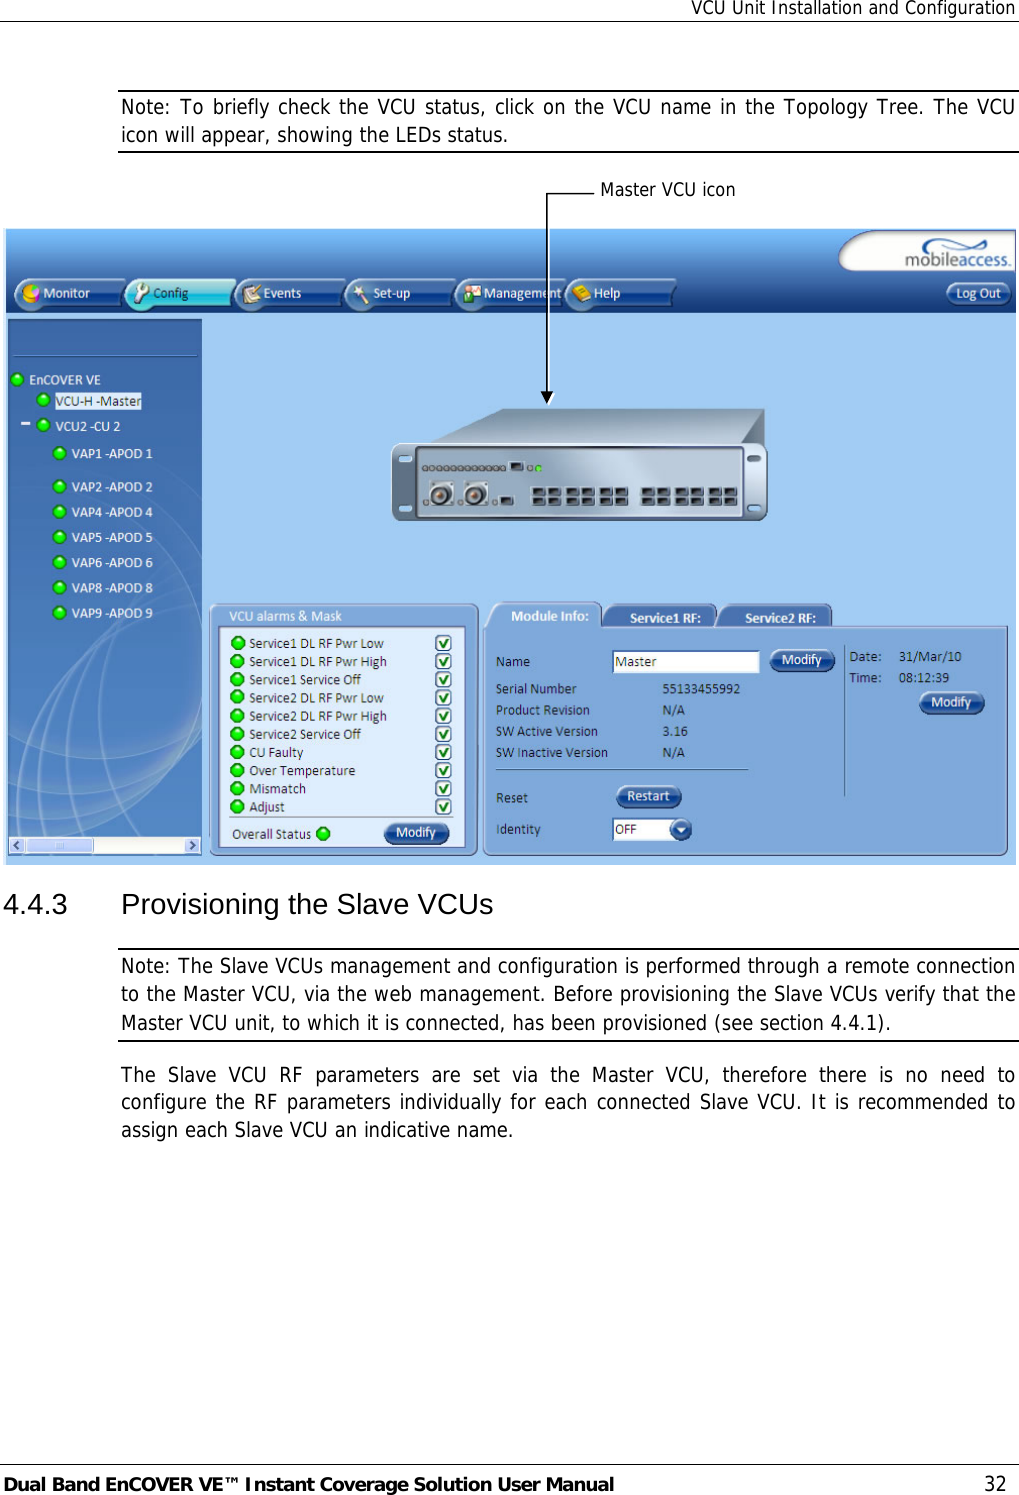 VCU Unit Installation and Configuration Dual Band EnCOVER VE™ Instant Coverage Solution User Manual  32 Note: To briefly check the VCU status, click on the VCU name in the Topology Tree. The VCU icon will appear, showing the LEDs status.   4.4.3  Provisioning the Slave VCUs Note: The Slave VCUs management and configuration is performed through a remote connection to the Master VCU, via the web management. Before provisioning the Slave VCUs verify that the Master VCU unit, to which it is connected, has been provisioned (see section  4.4.1). The Slave VCU RF parameters are set via the Master VCU, therefore there is no need to configure the RF parameters individually for each connected Slave VCU. It is recommended to assign each Slave VCU an indicative name. Master VCU icon 